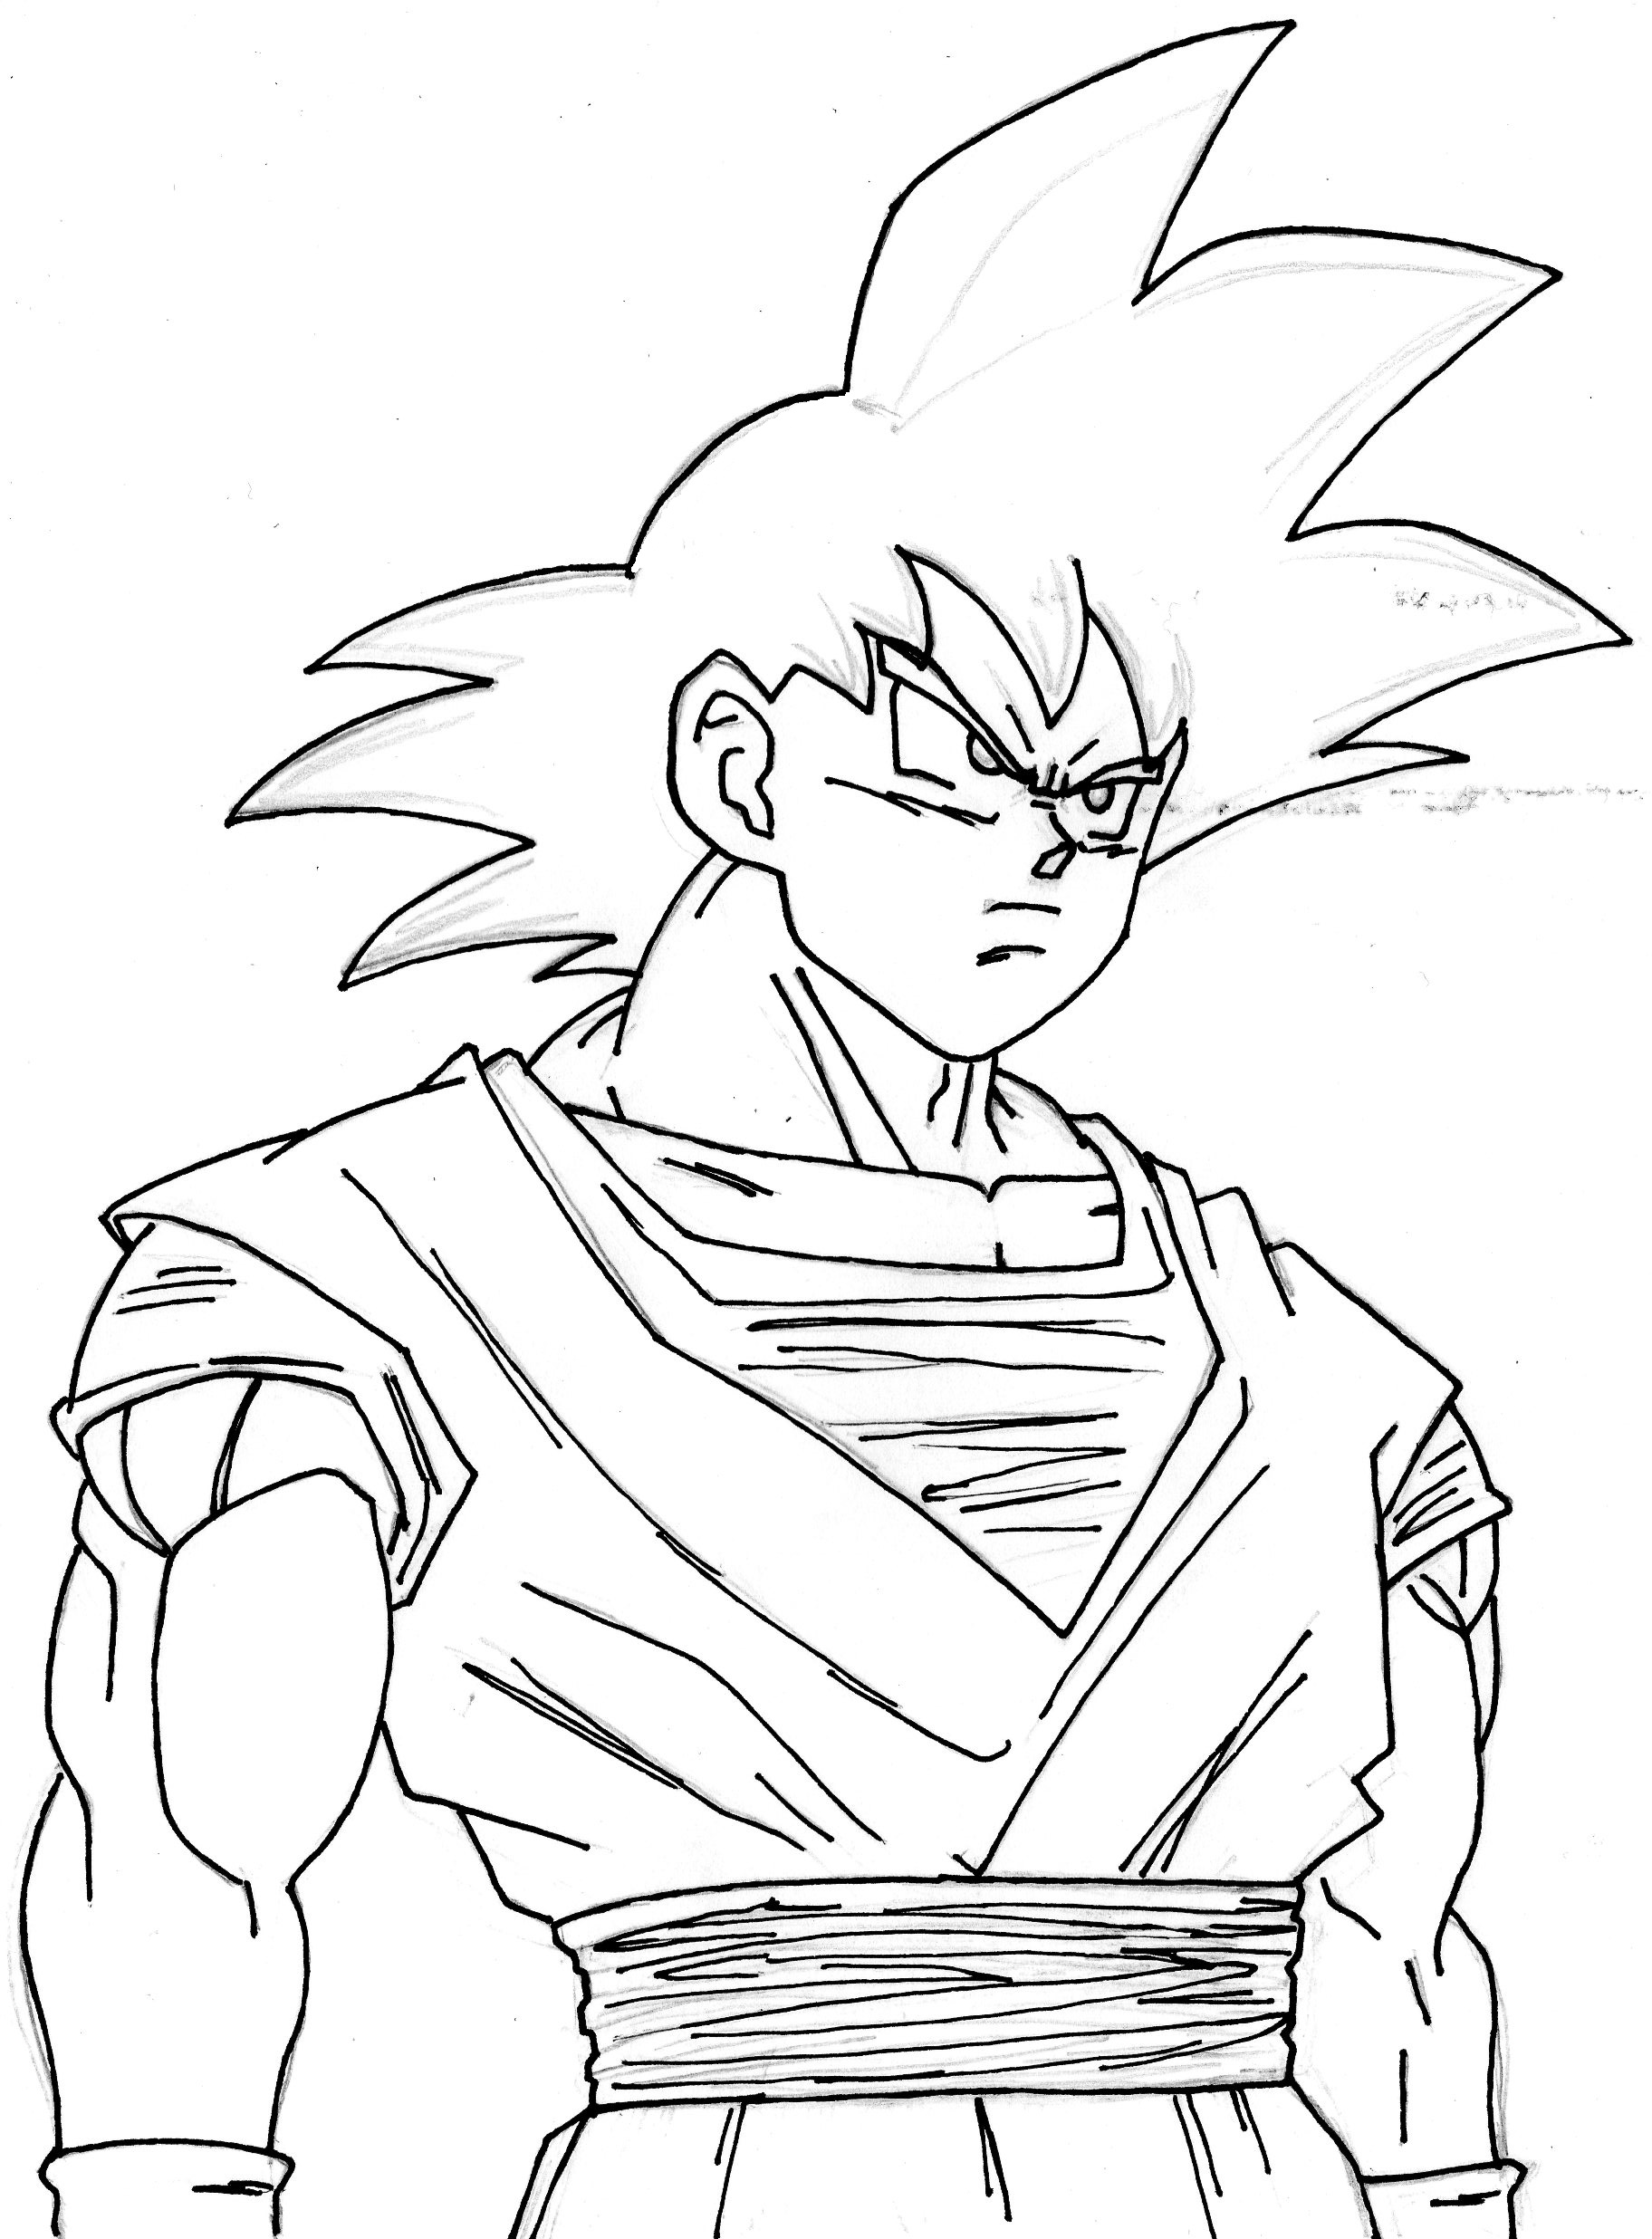 Goku Without Favourites Sketch Coloring Page.